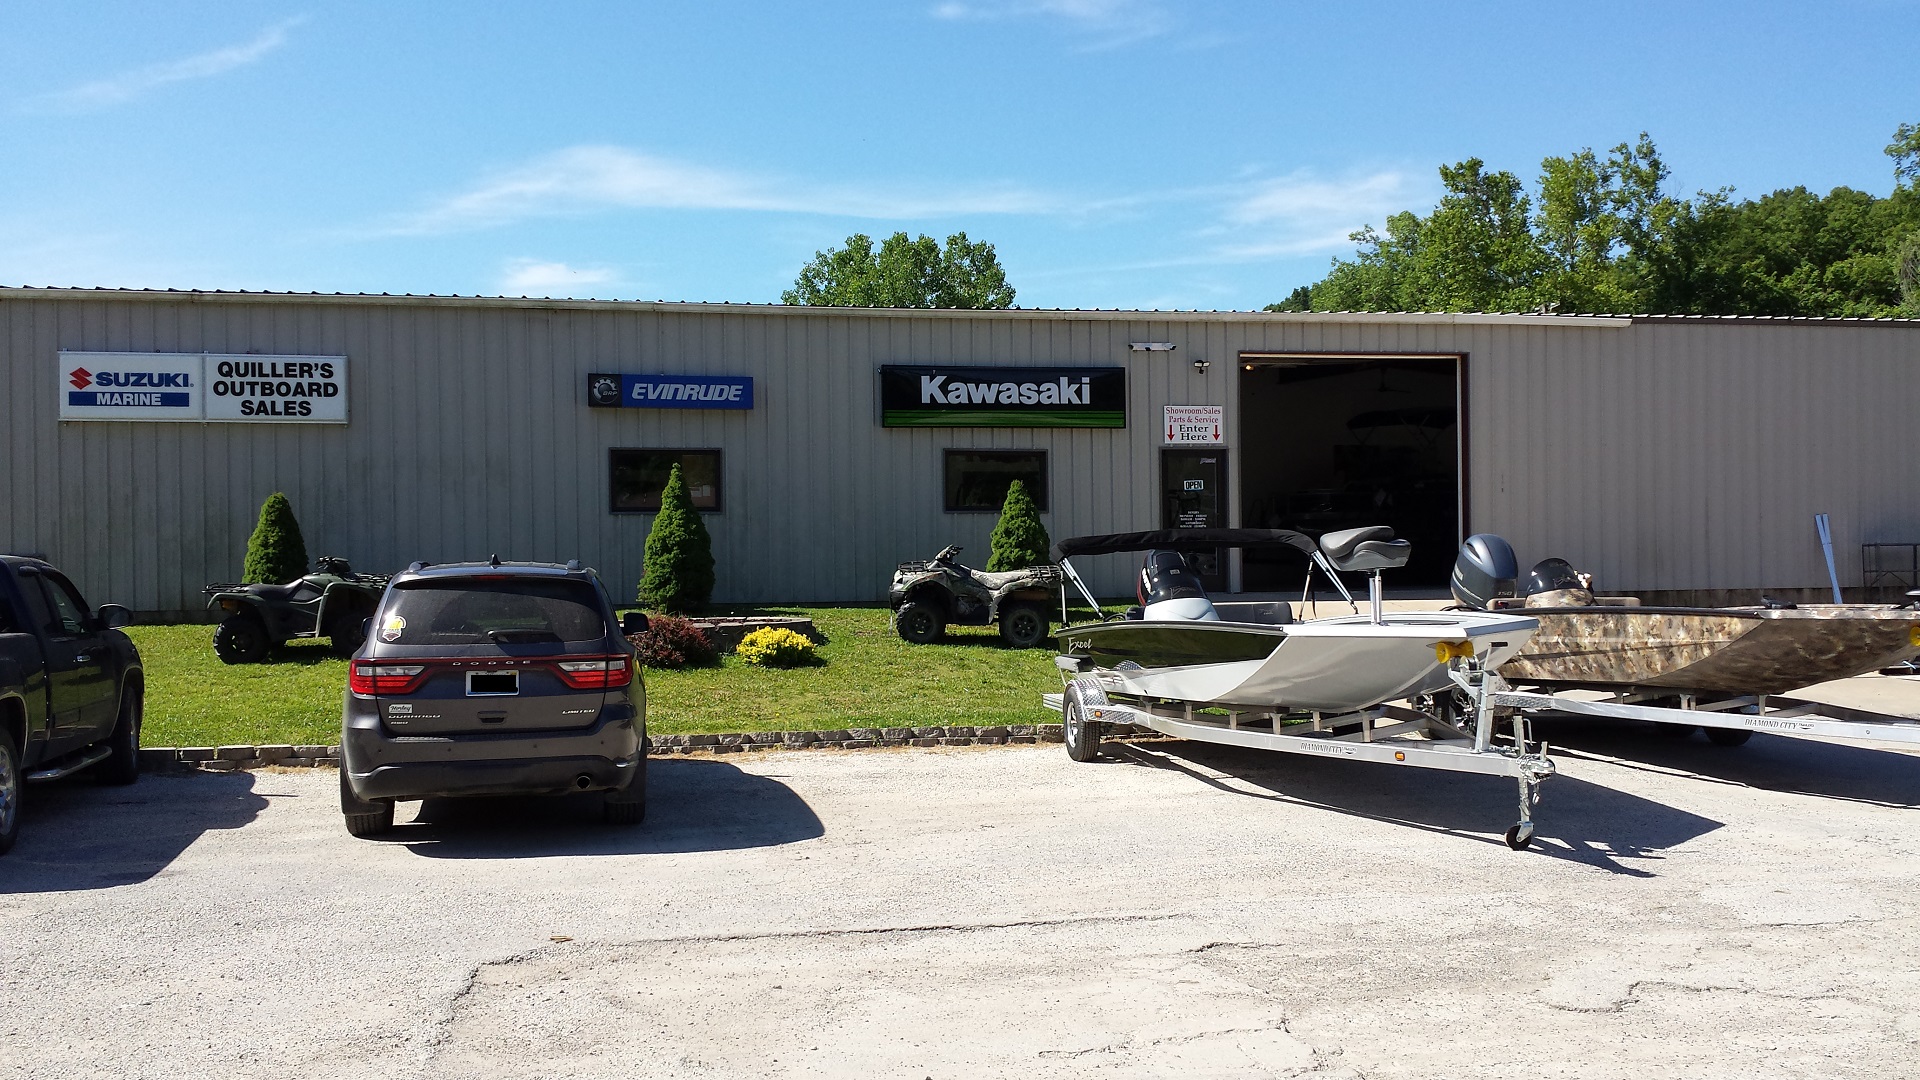 Quiller's Outboard - New & Used Boats, Outboards, ATVs, and UTVs in Hardin, IL, near Springfield & Edwardsville